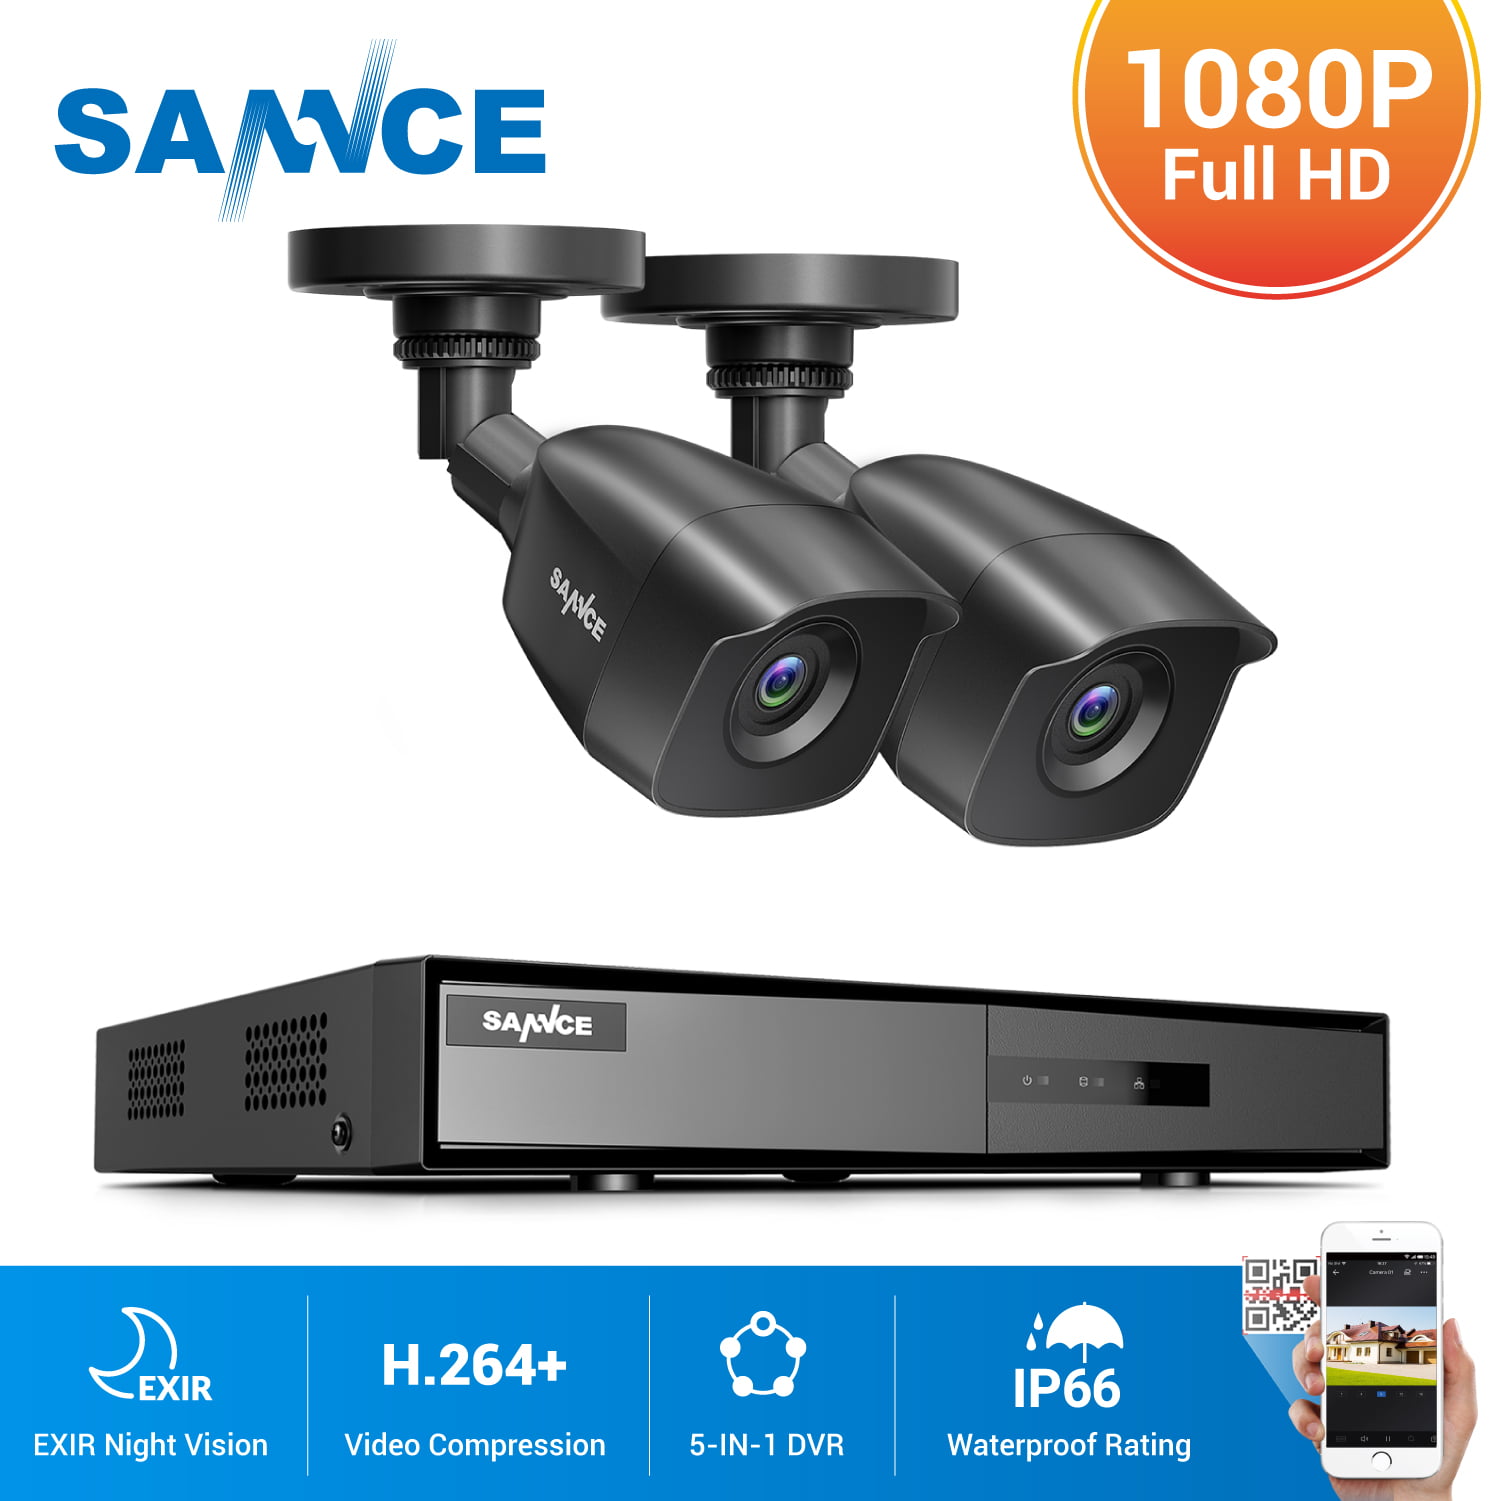 DVR 100ft Night Vision IP66 Hikvision SANNCE 1080P CCTV Camera System 4CH 5-IN-1 H.264 